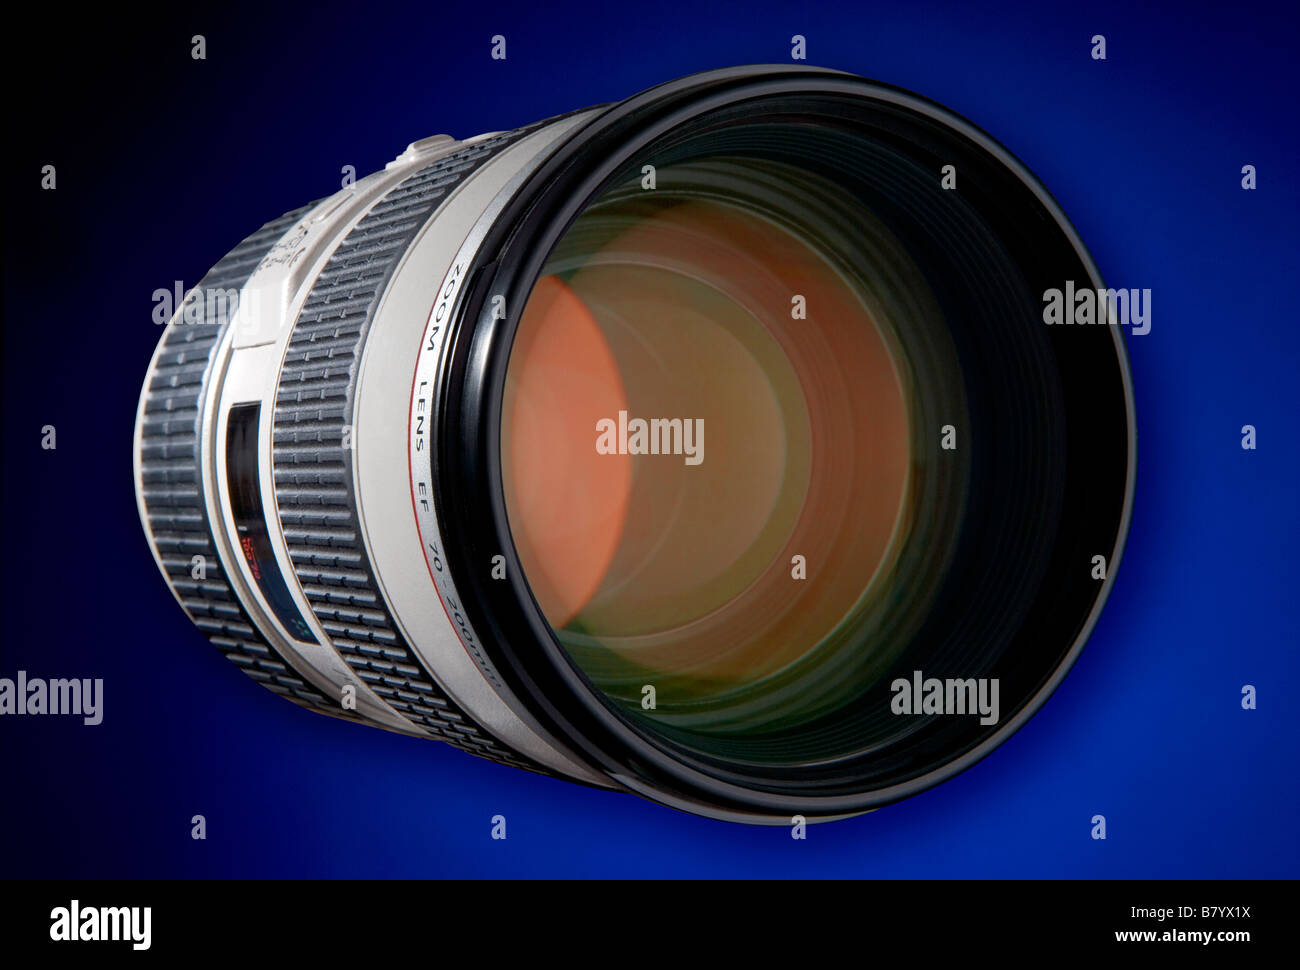 A white body lens with ruby red coatings on the front elements This one os an 80 200 zoom from an SLR digital camera Stock Photo